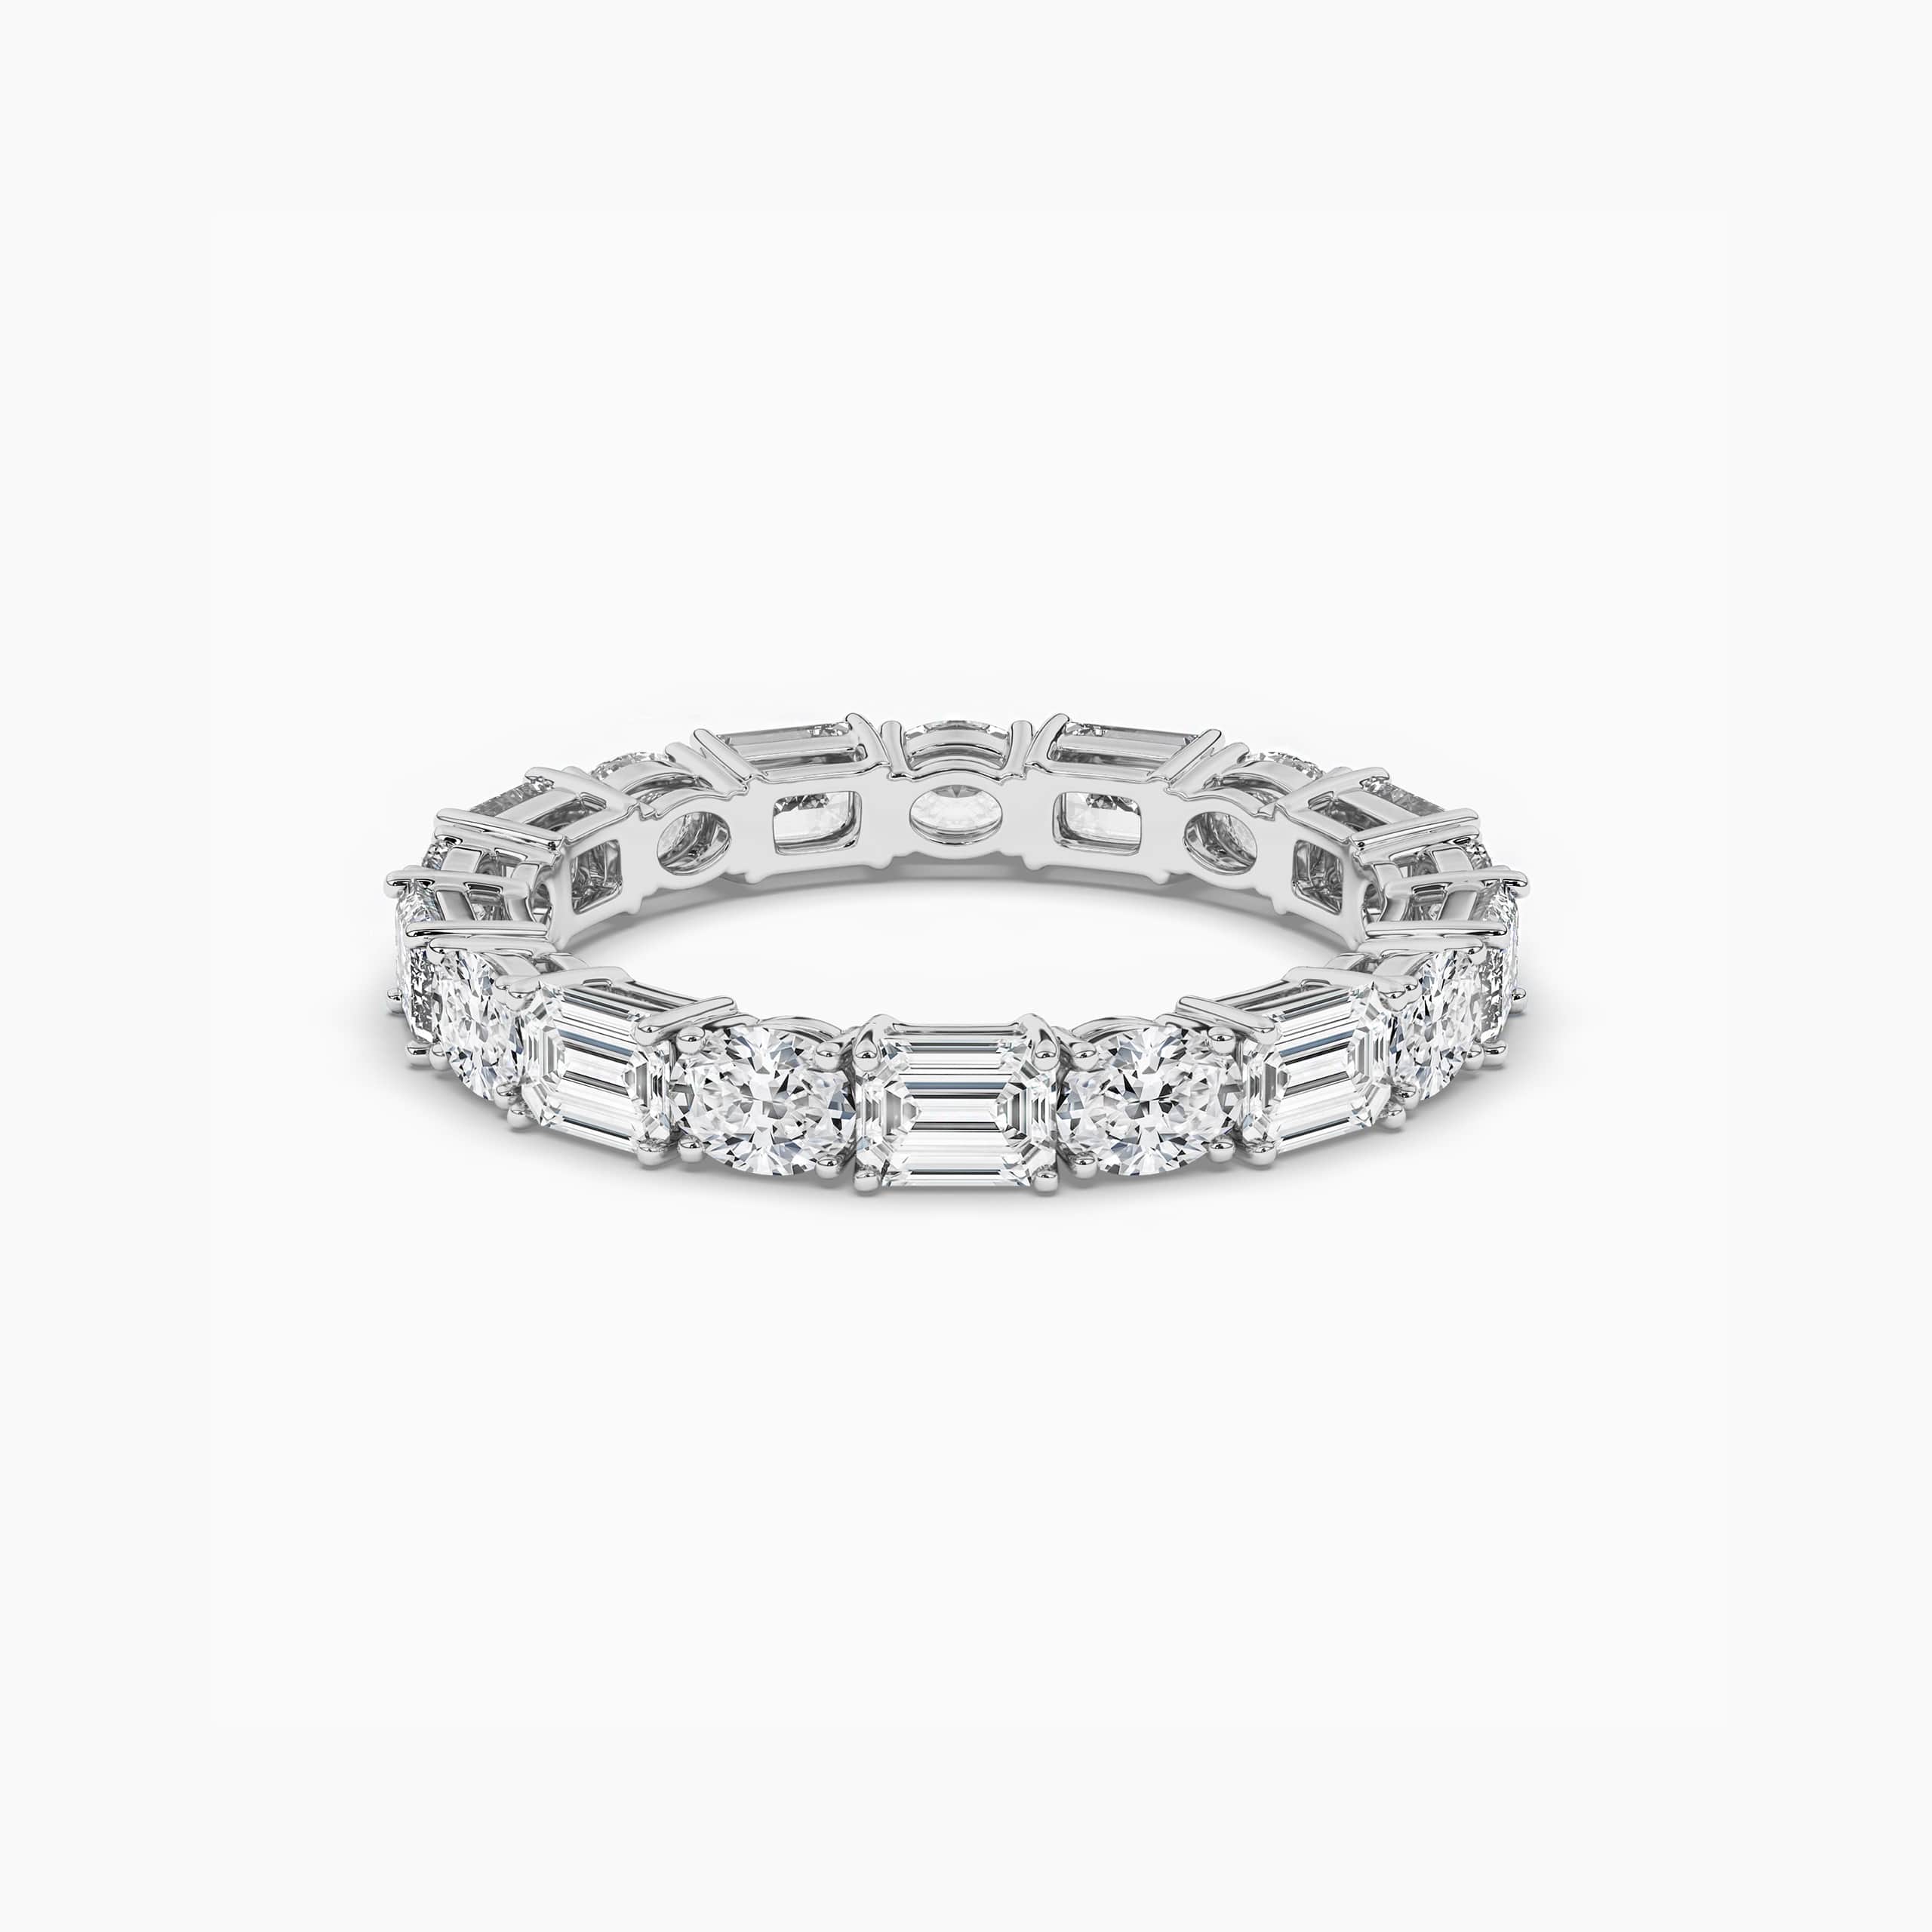 Emerald & Oval Cut Diamond Eternity Band Set East To West In White Gold